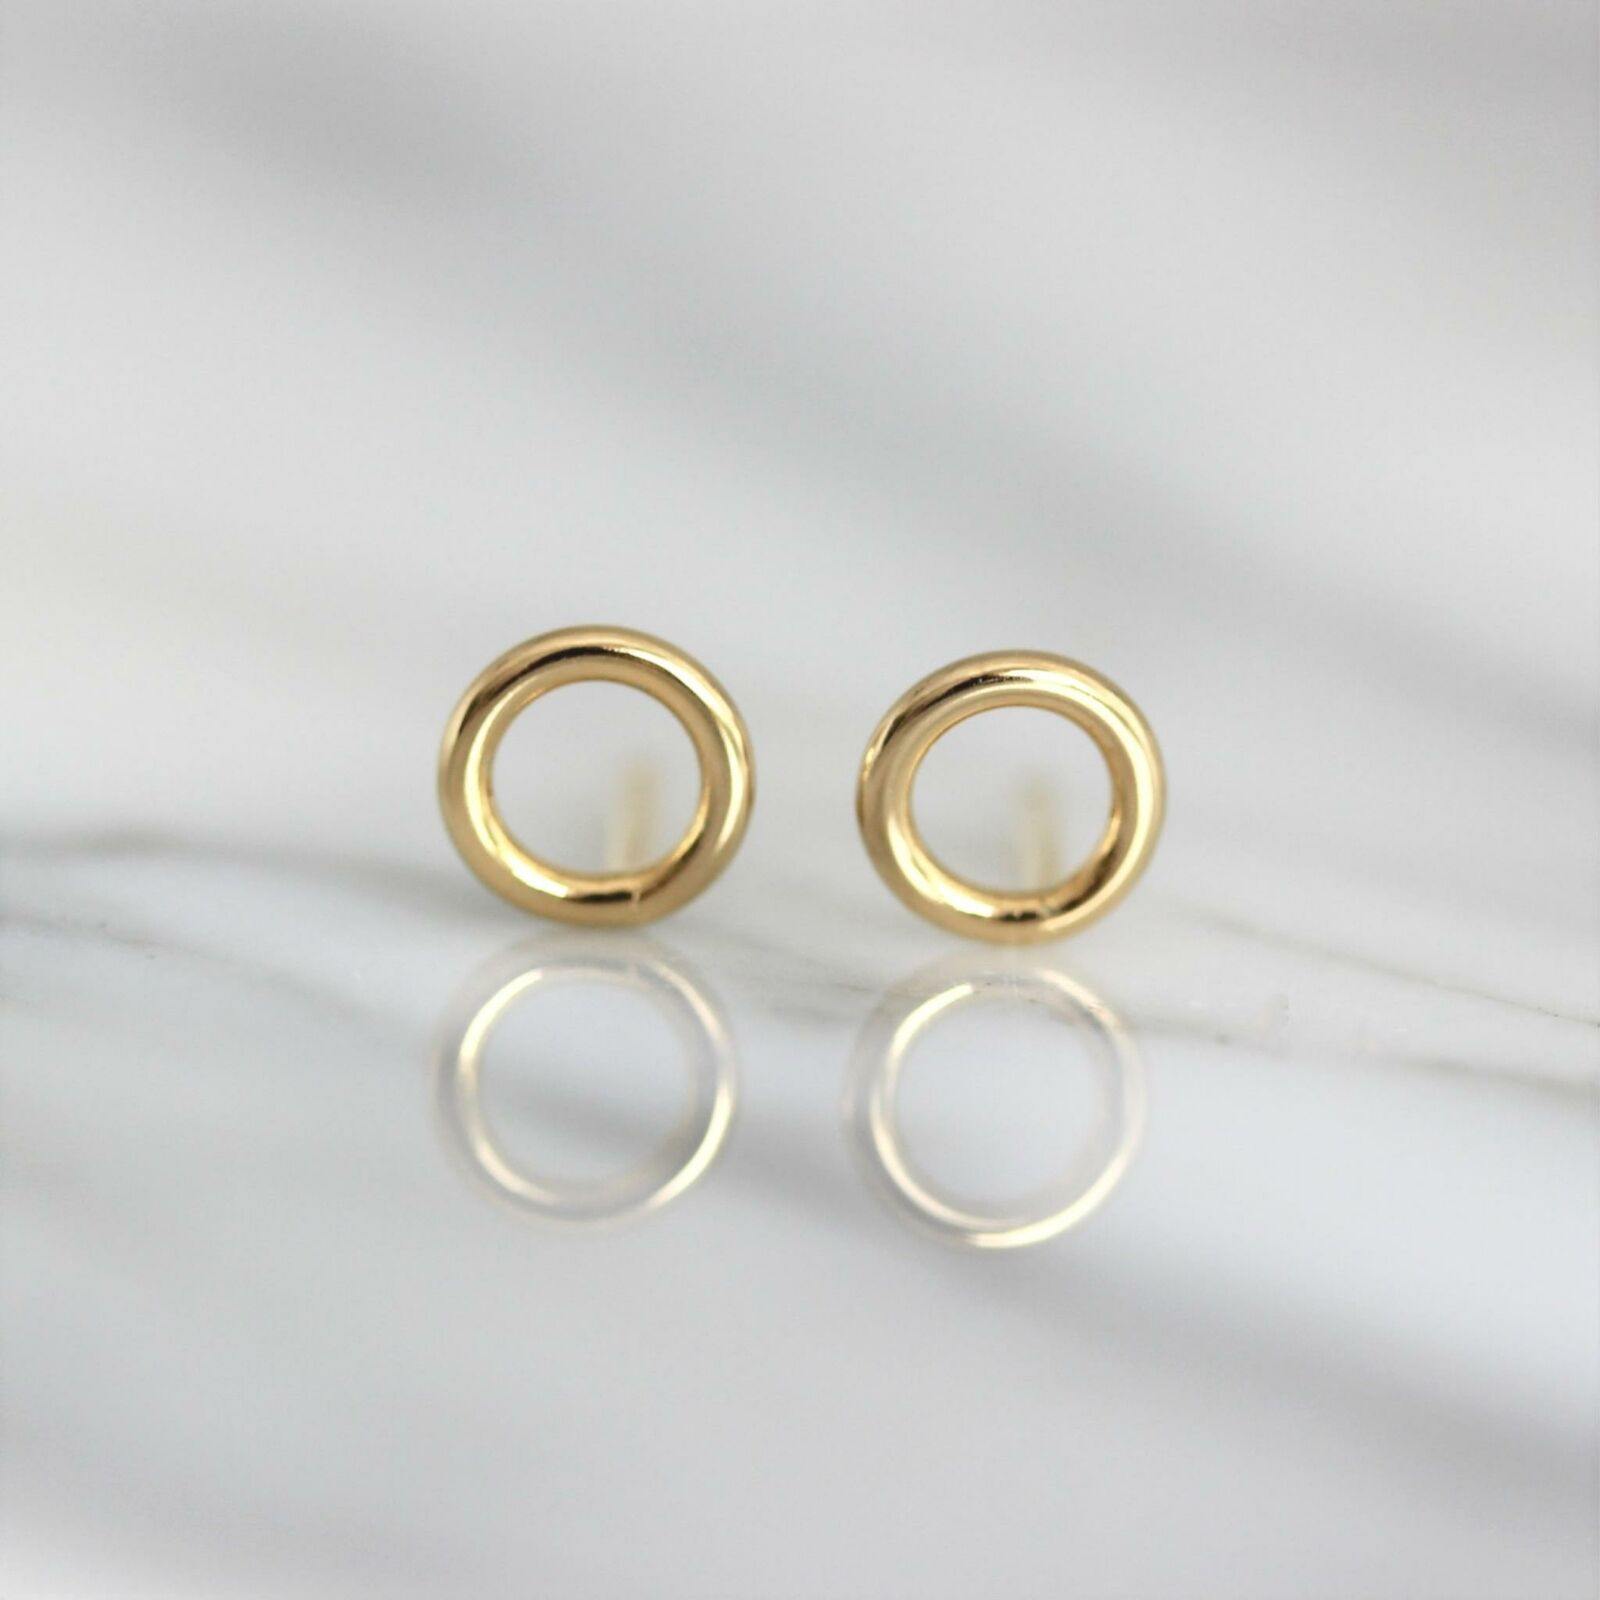 Sterling Silver Yellow Gold Plated 7mm Cut Out Circle "O" Stud Earrings - STERLING SILVER DESIGNS